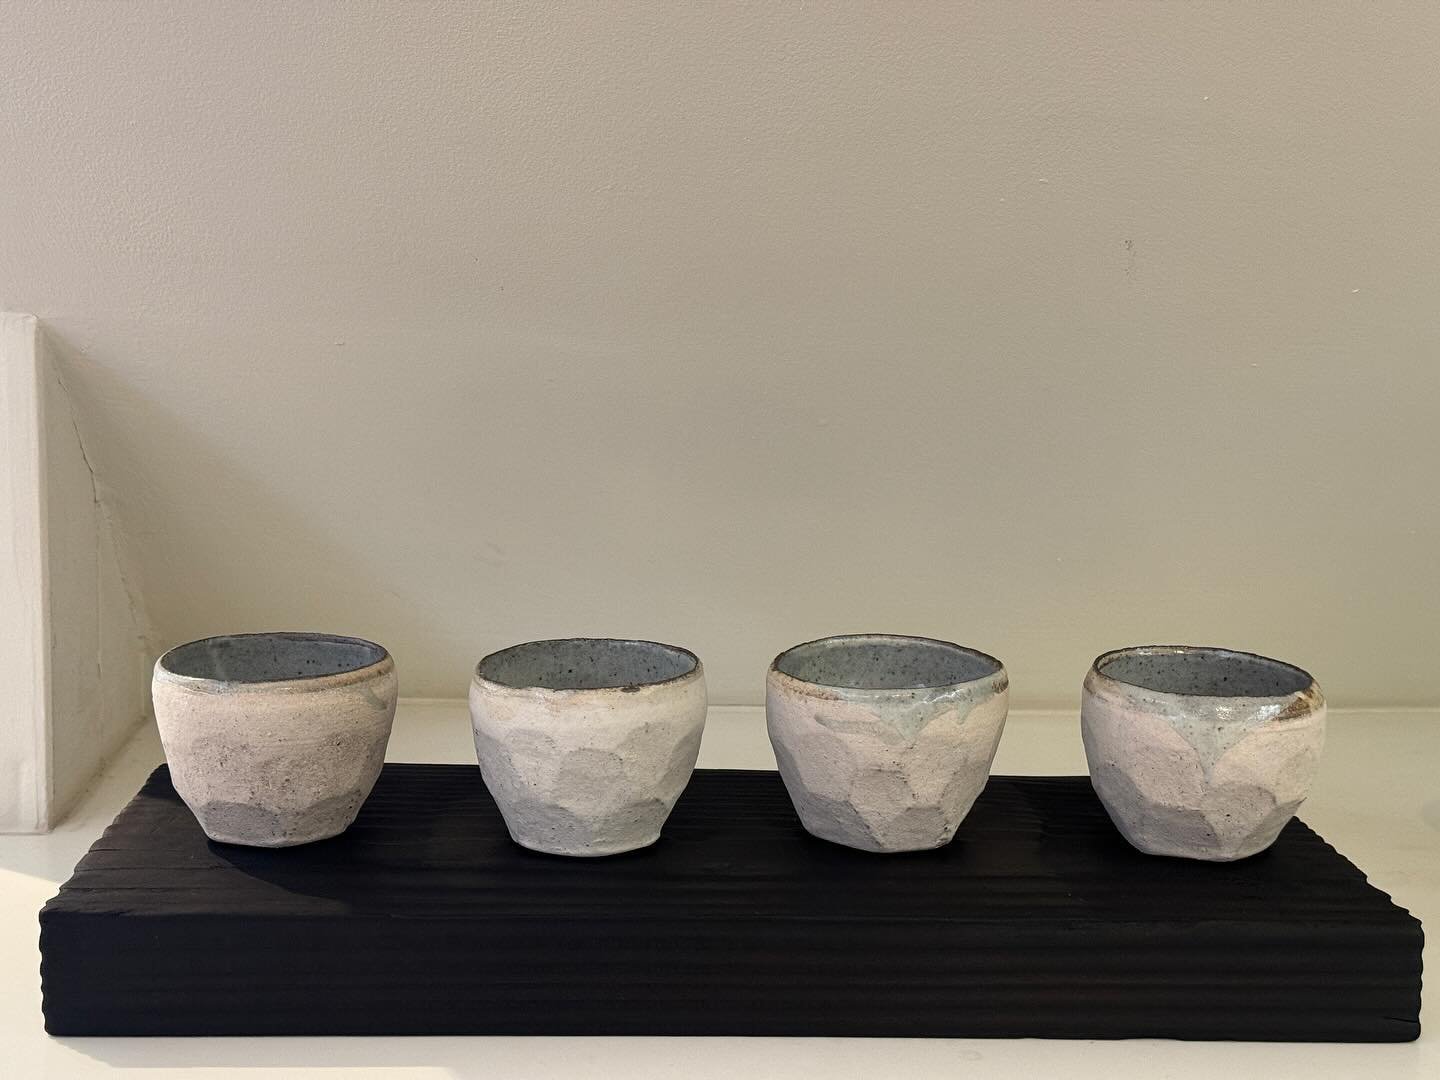 Contemplation Cups

Small Ritual Cups

by Clare Walters
@p_l_o_u_g_h_s_t_u_d_i_o 

current exhibition at The Table
.
.
#clarewaltersceramics #contemplationcups #ritualcups #galleryownerslife #hayonwye #thetablehay